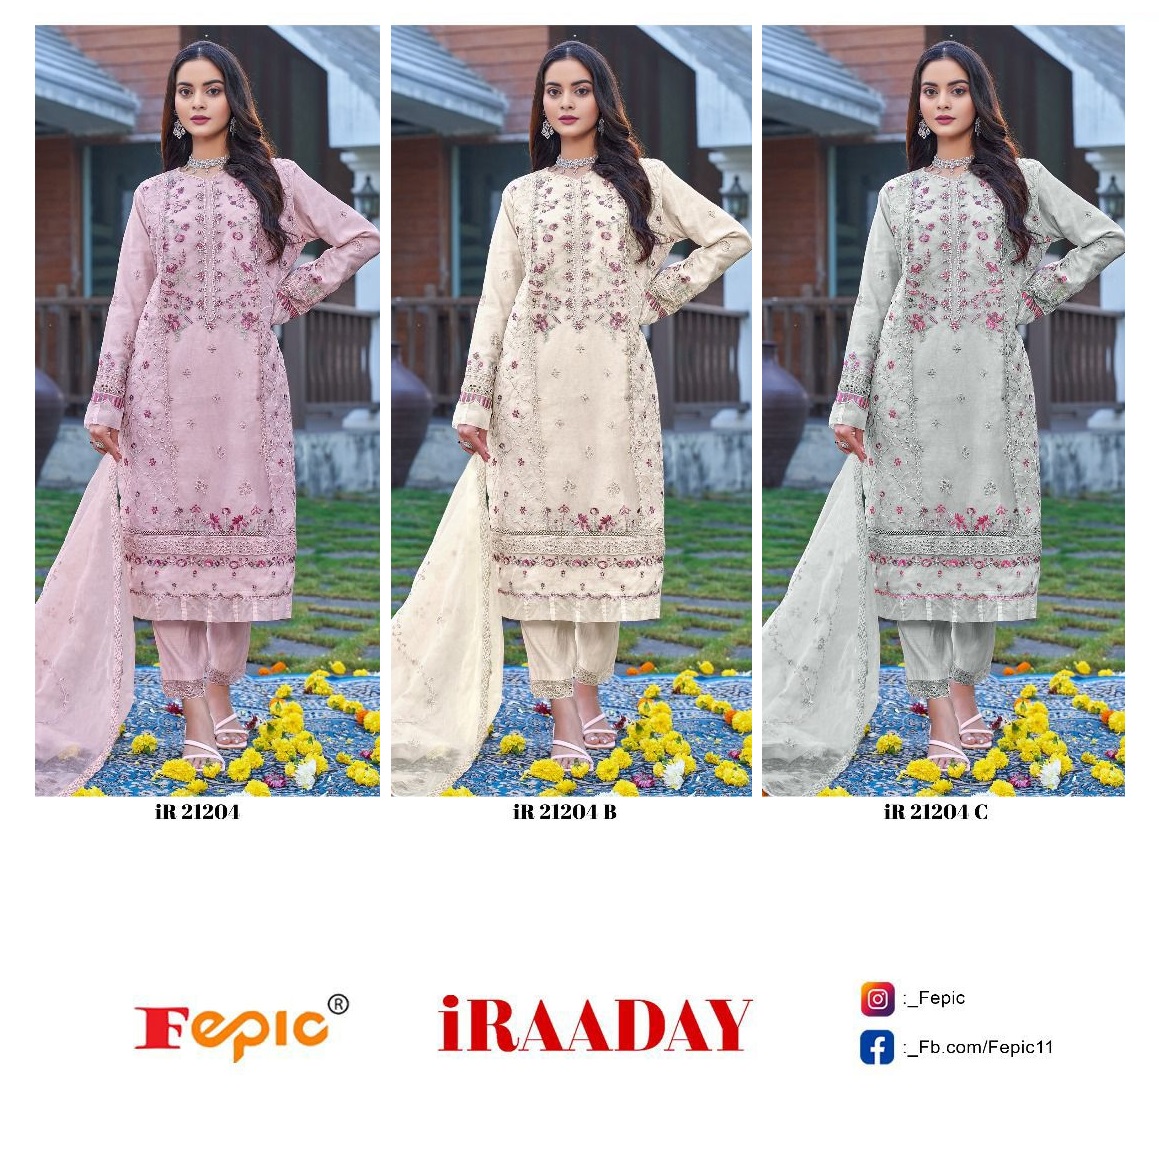 FEPIC IR 21204 IRAADAY PAKISTANI SUITS IN INDIA